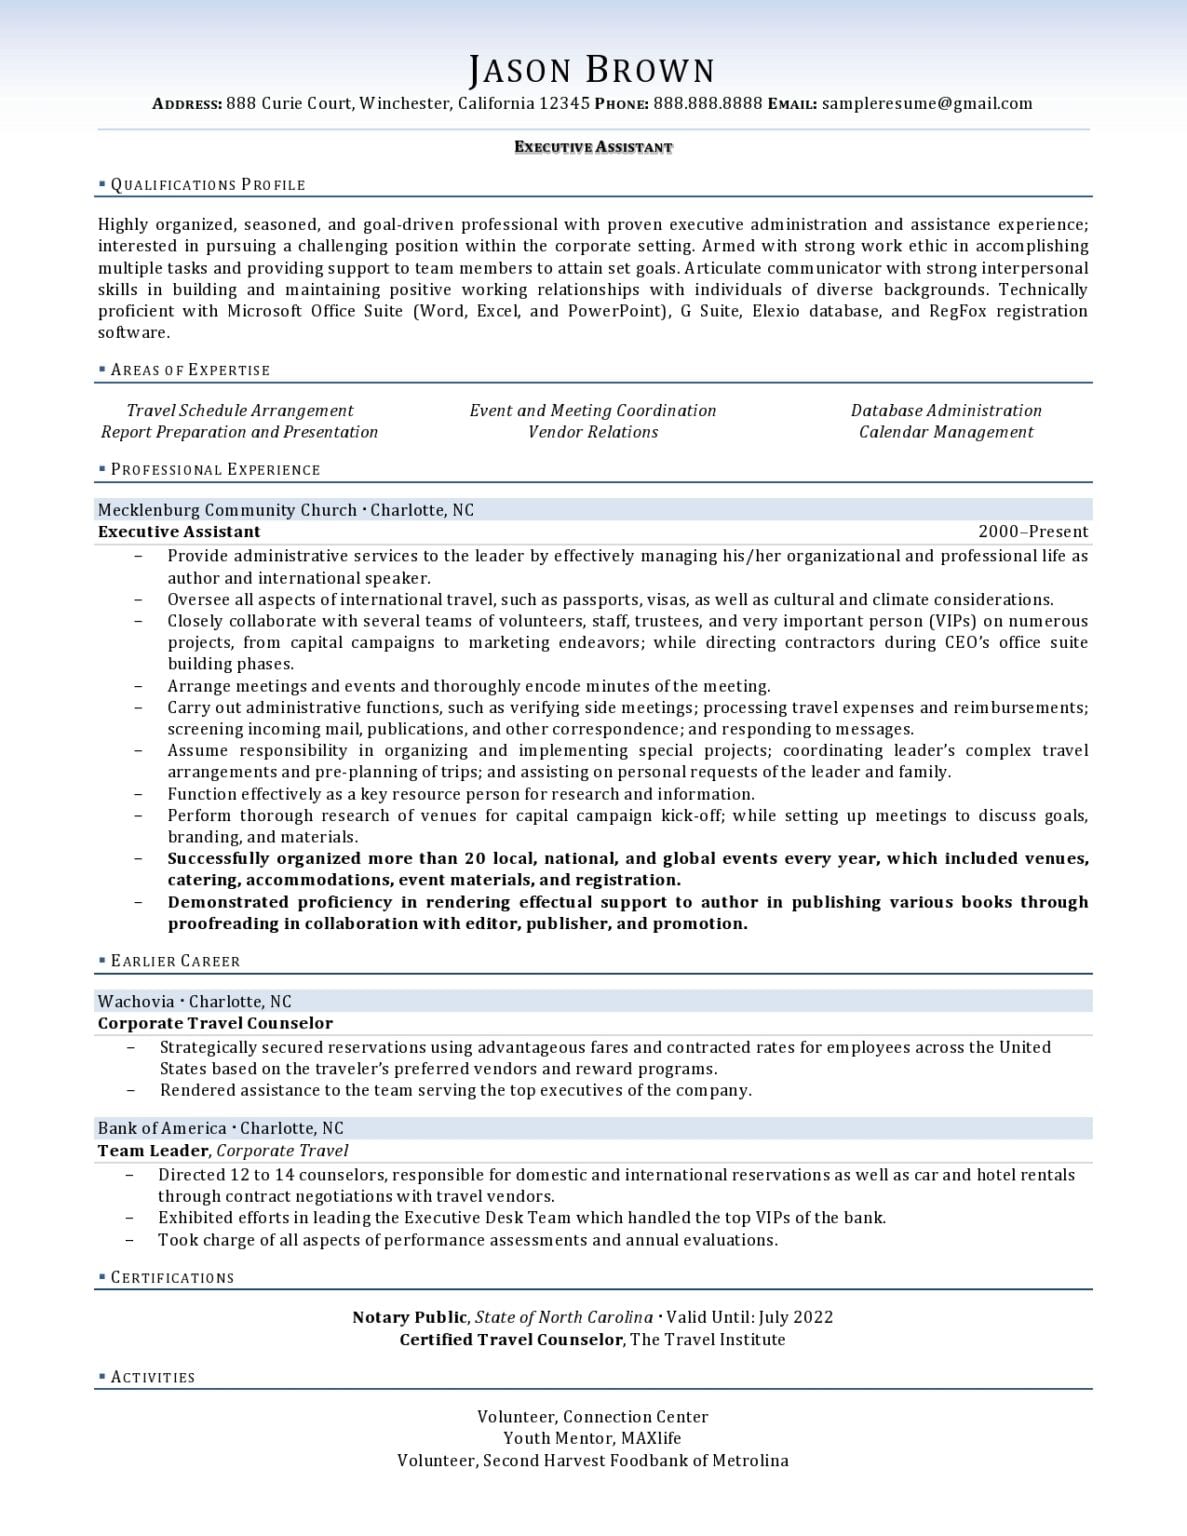 executive assistant resume examples 2021